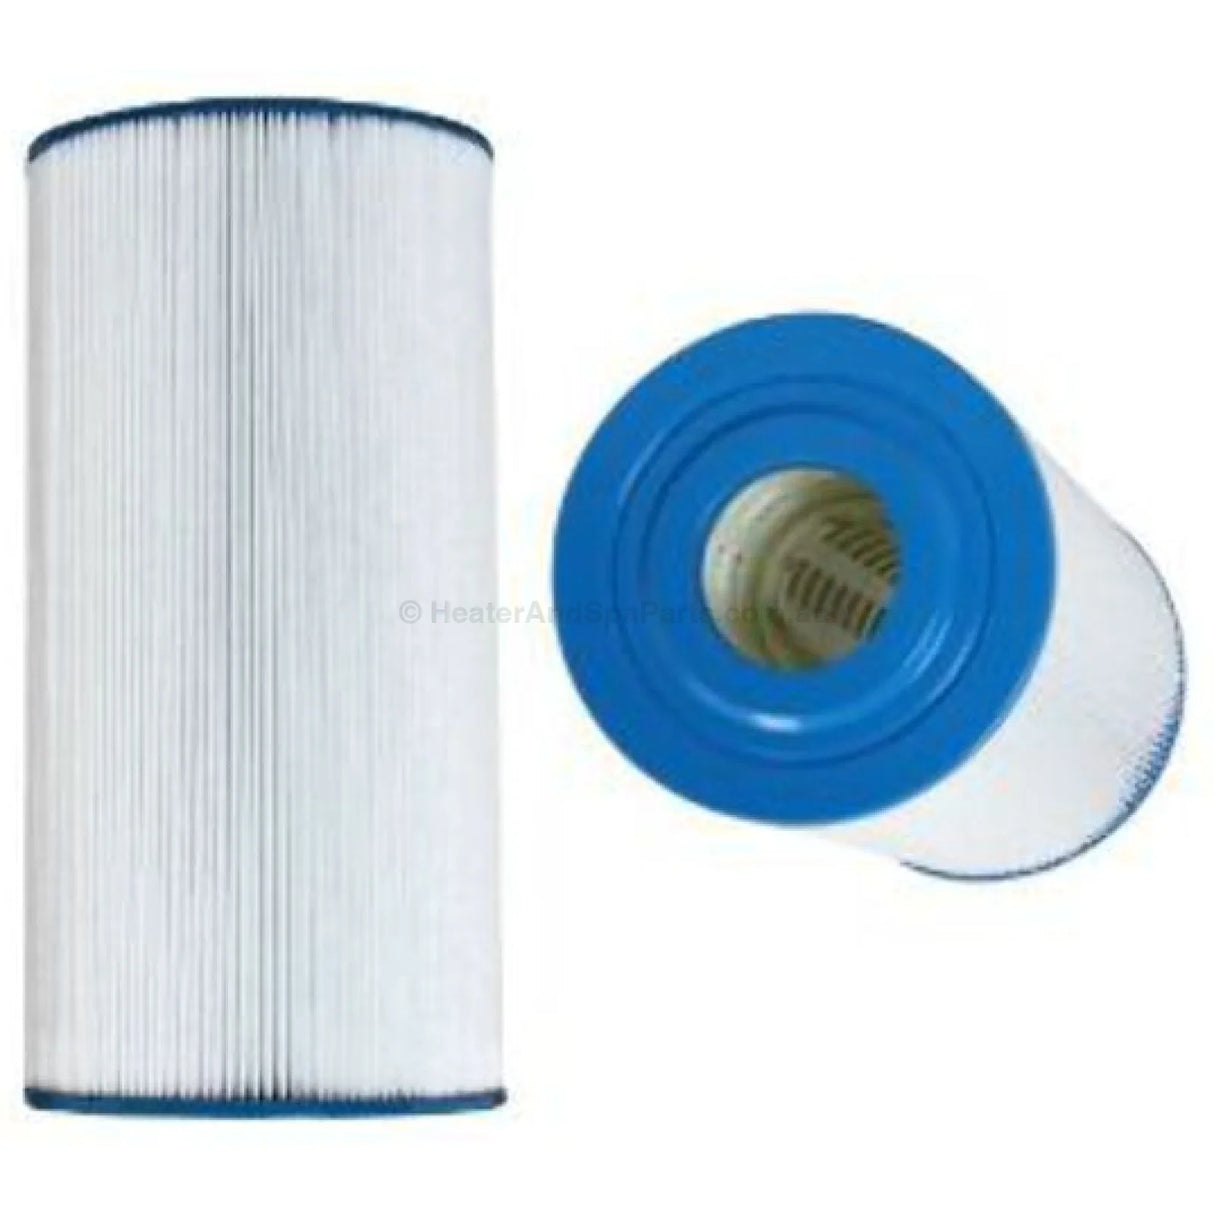 728mm x 185mm Cartridge Filter Replacement - Monarch EcoPure 150 / Poolrite Enduro EC150 - Heater and Spa Parts